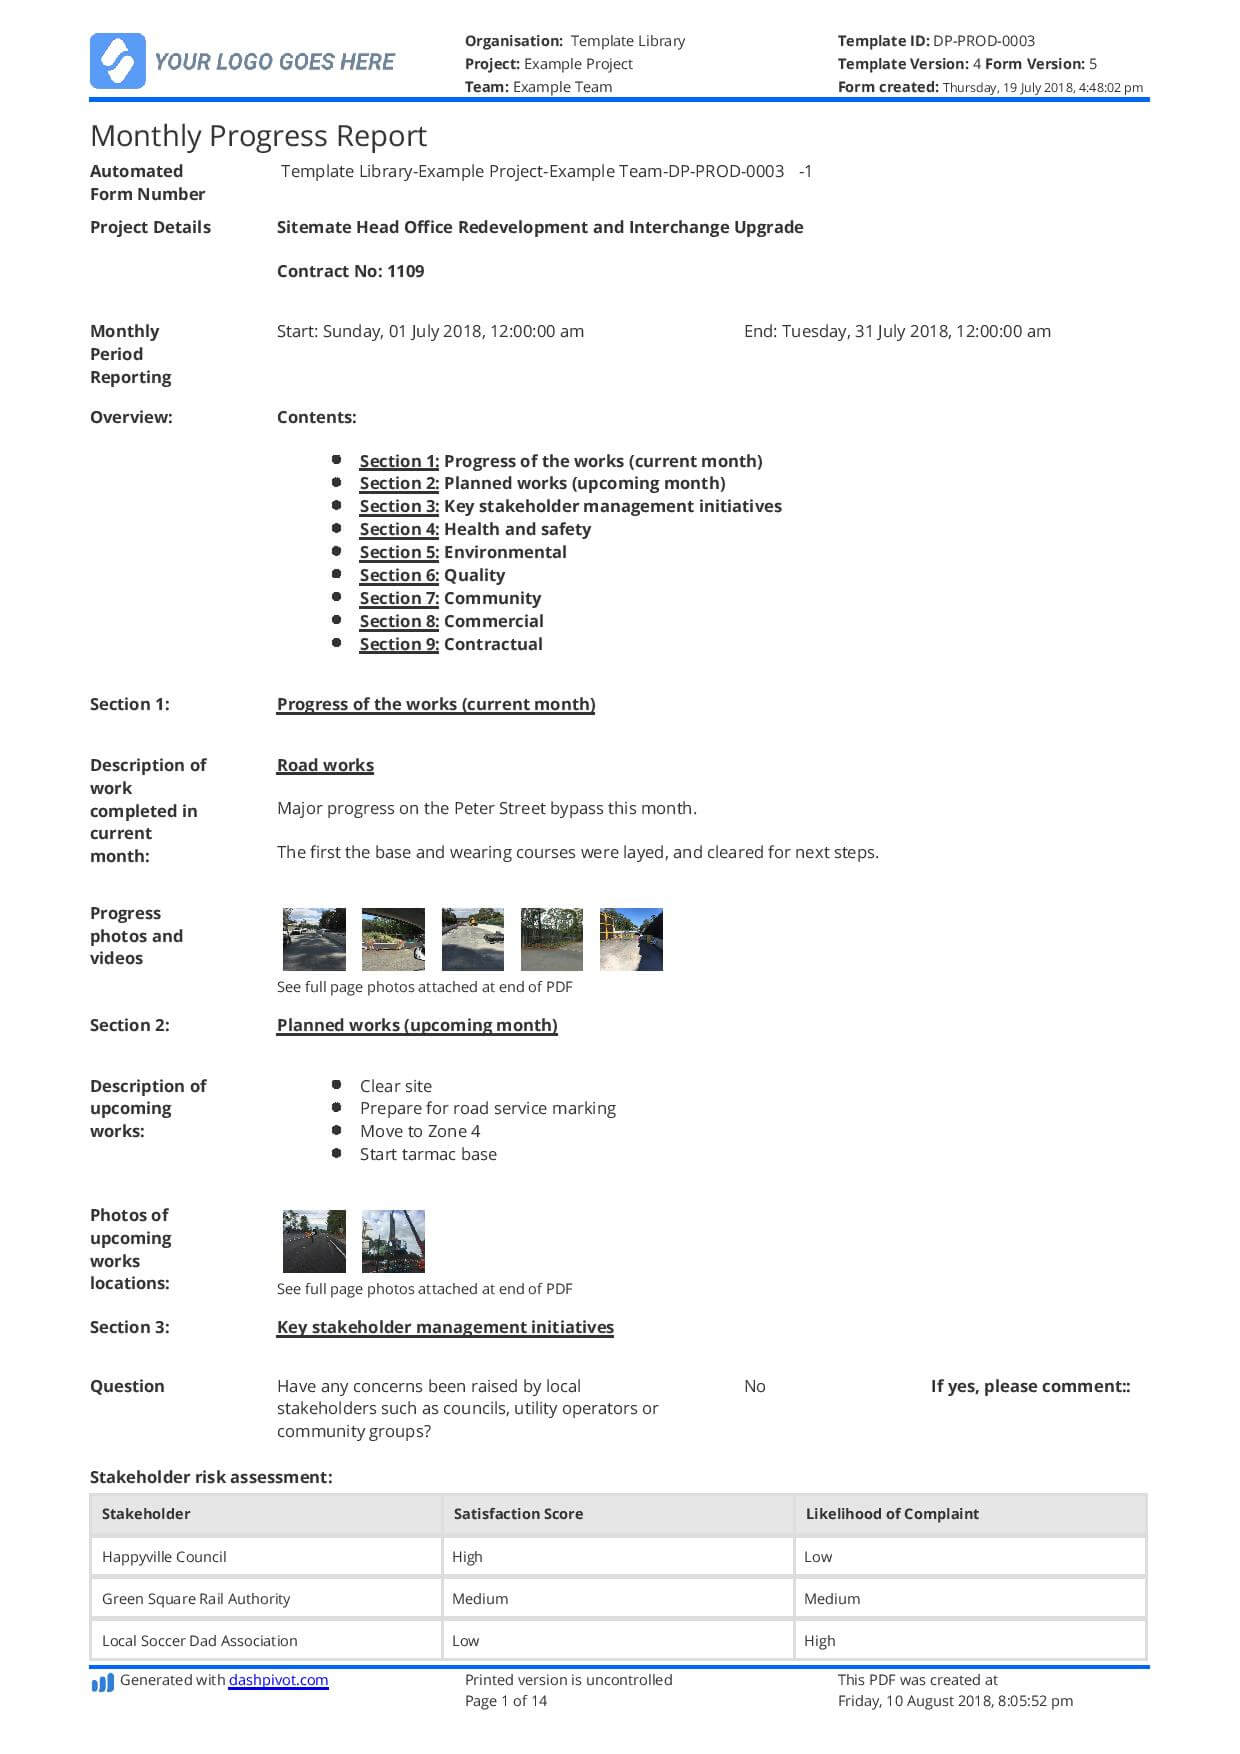 Monthly Construction Progress Report Template: Use This For Engineering Progress Report Template